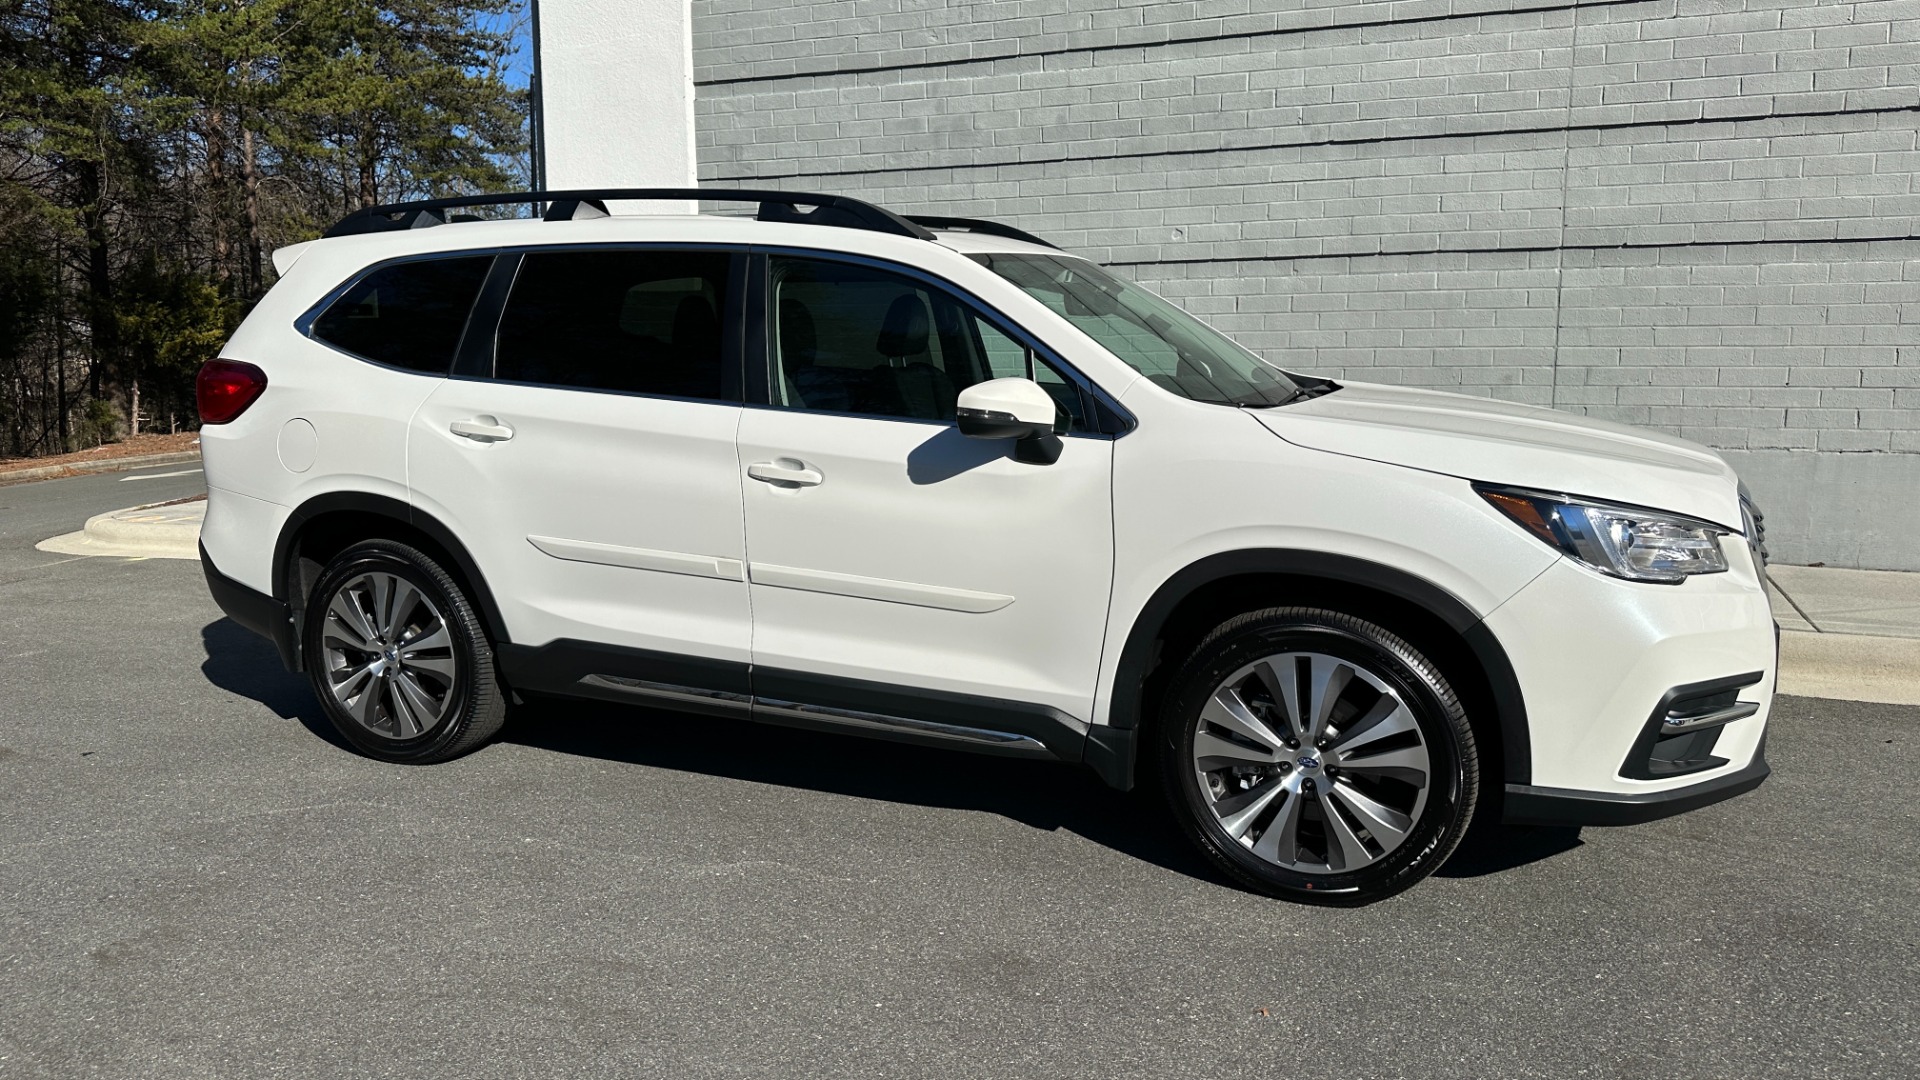 Used 2021 Subaru Ascent LIMITED / DRIVER ASSISTANCE / NAVIGATION / PANORAMIC ROOF / LEATHER for sale $36,995 at Formula Imports in Charlotte NC 28227 3